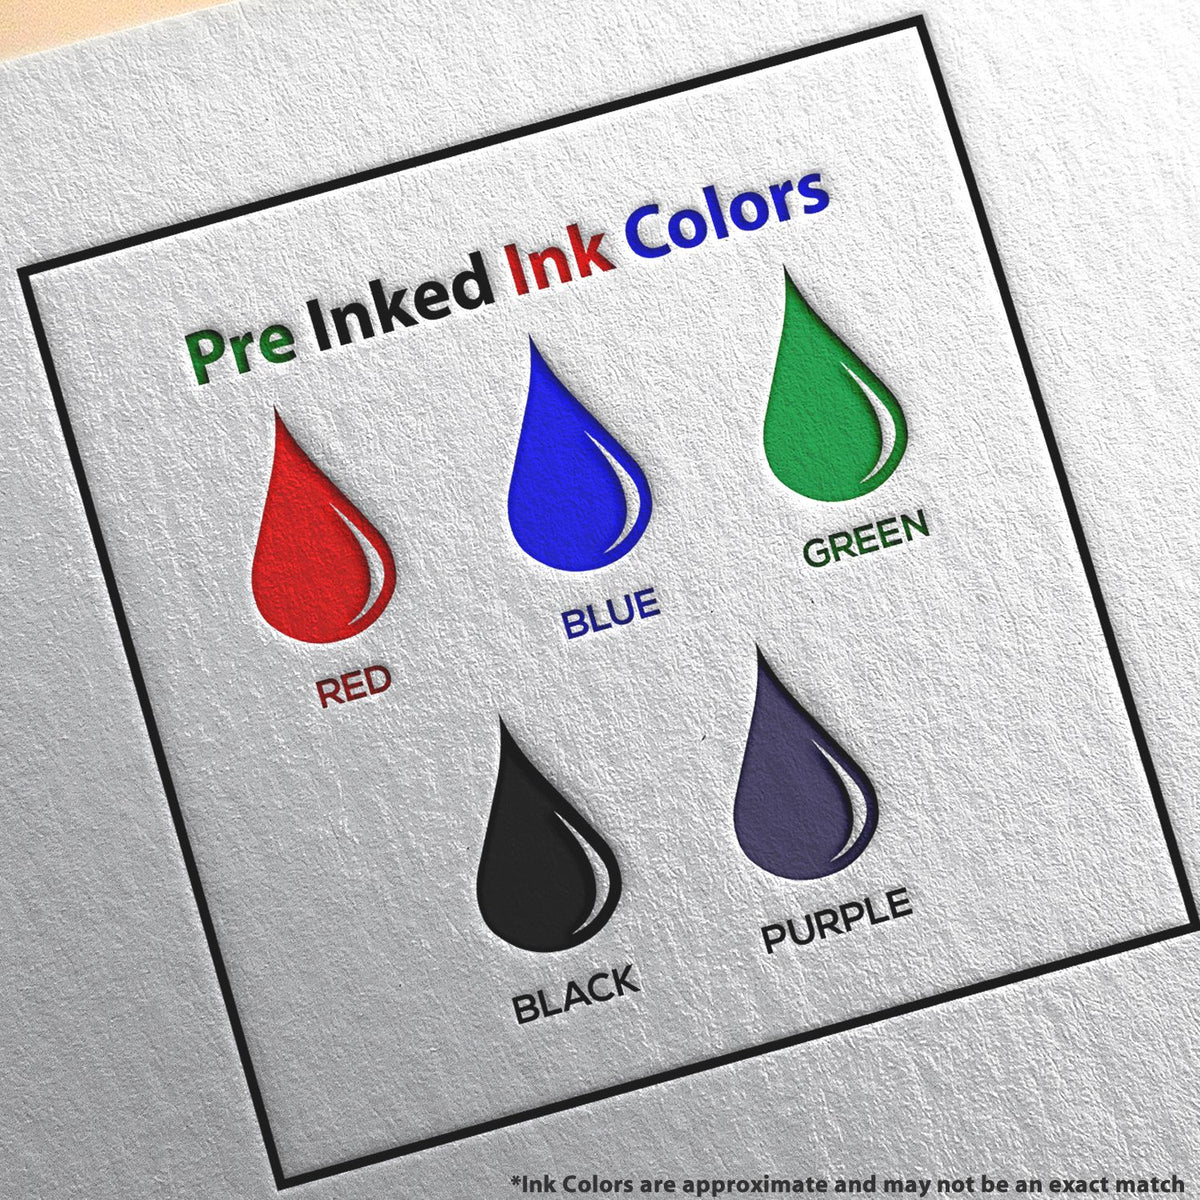 A picture showing the different ink colors or hues available for the MaxLight Premium Pre-Inked North Carolina State Seal Notarial Stamp product.